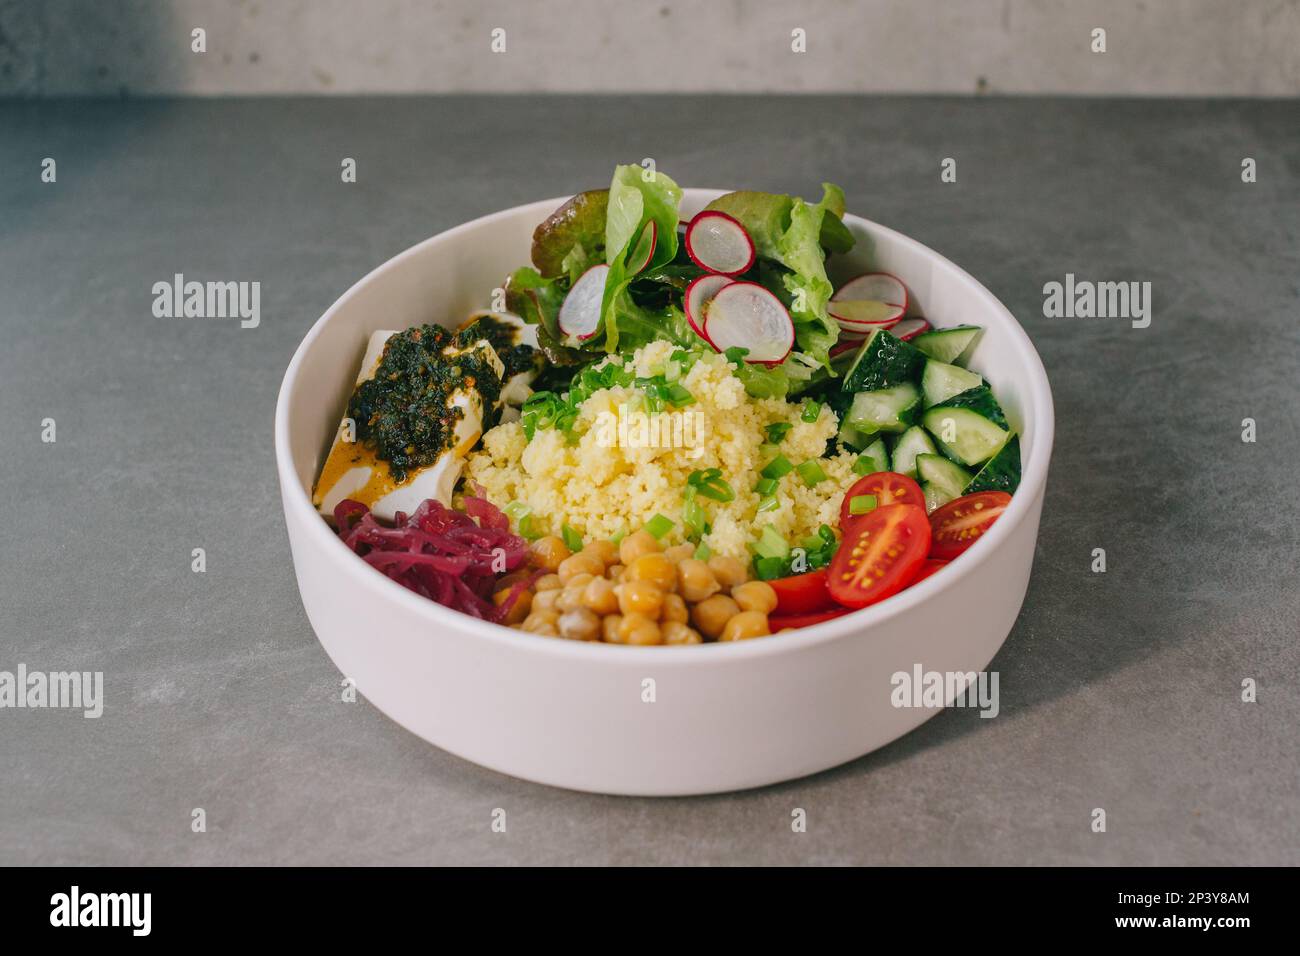 Poke bowl with vegetables and cheese. Stock Photo